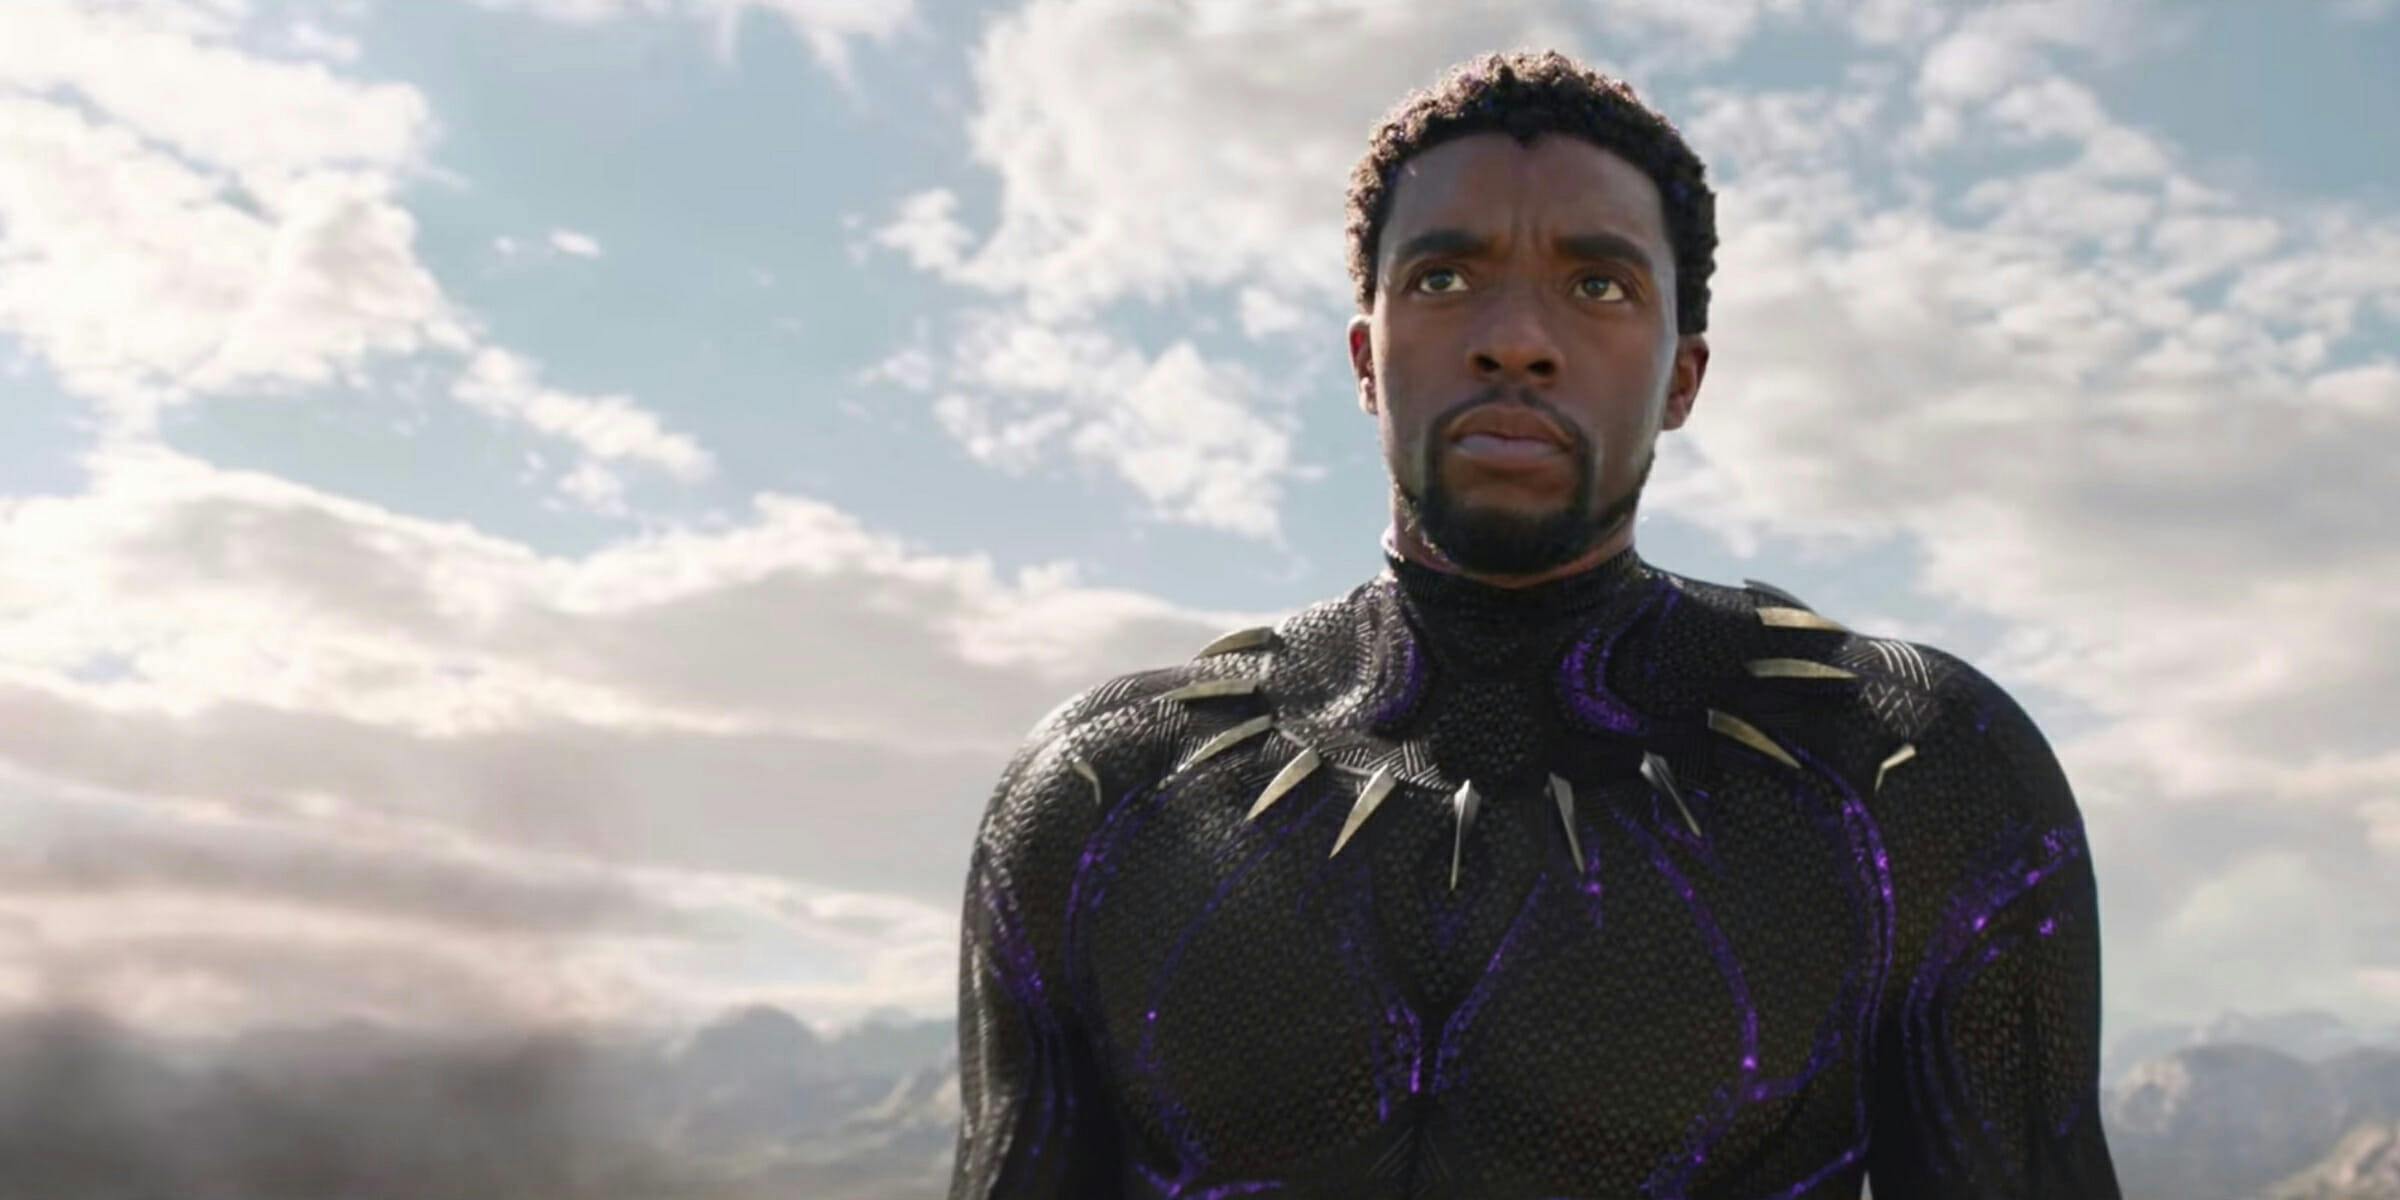 'Black Panther' Nabs 7 Oscar Nominations, Including Best Picture